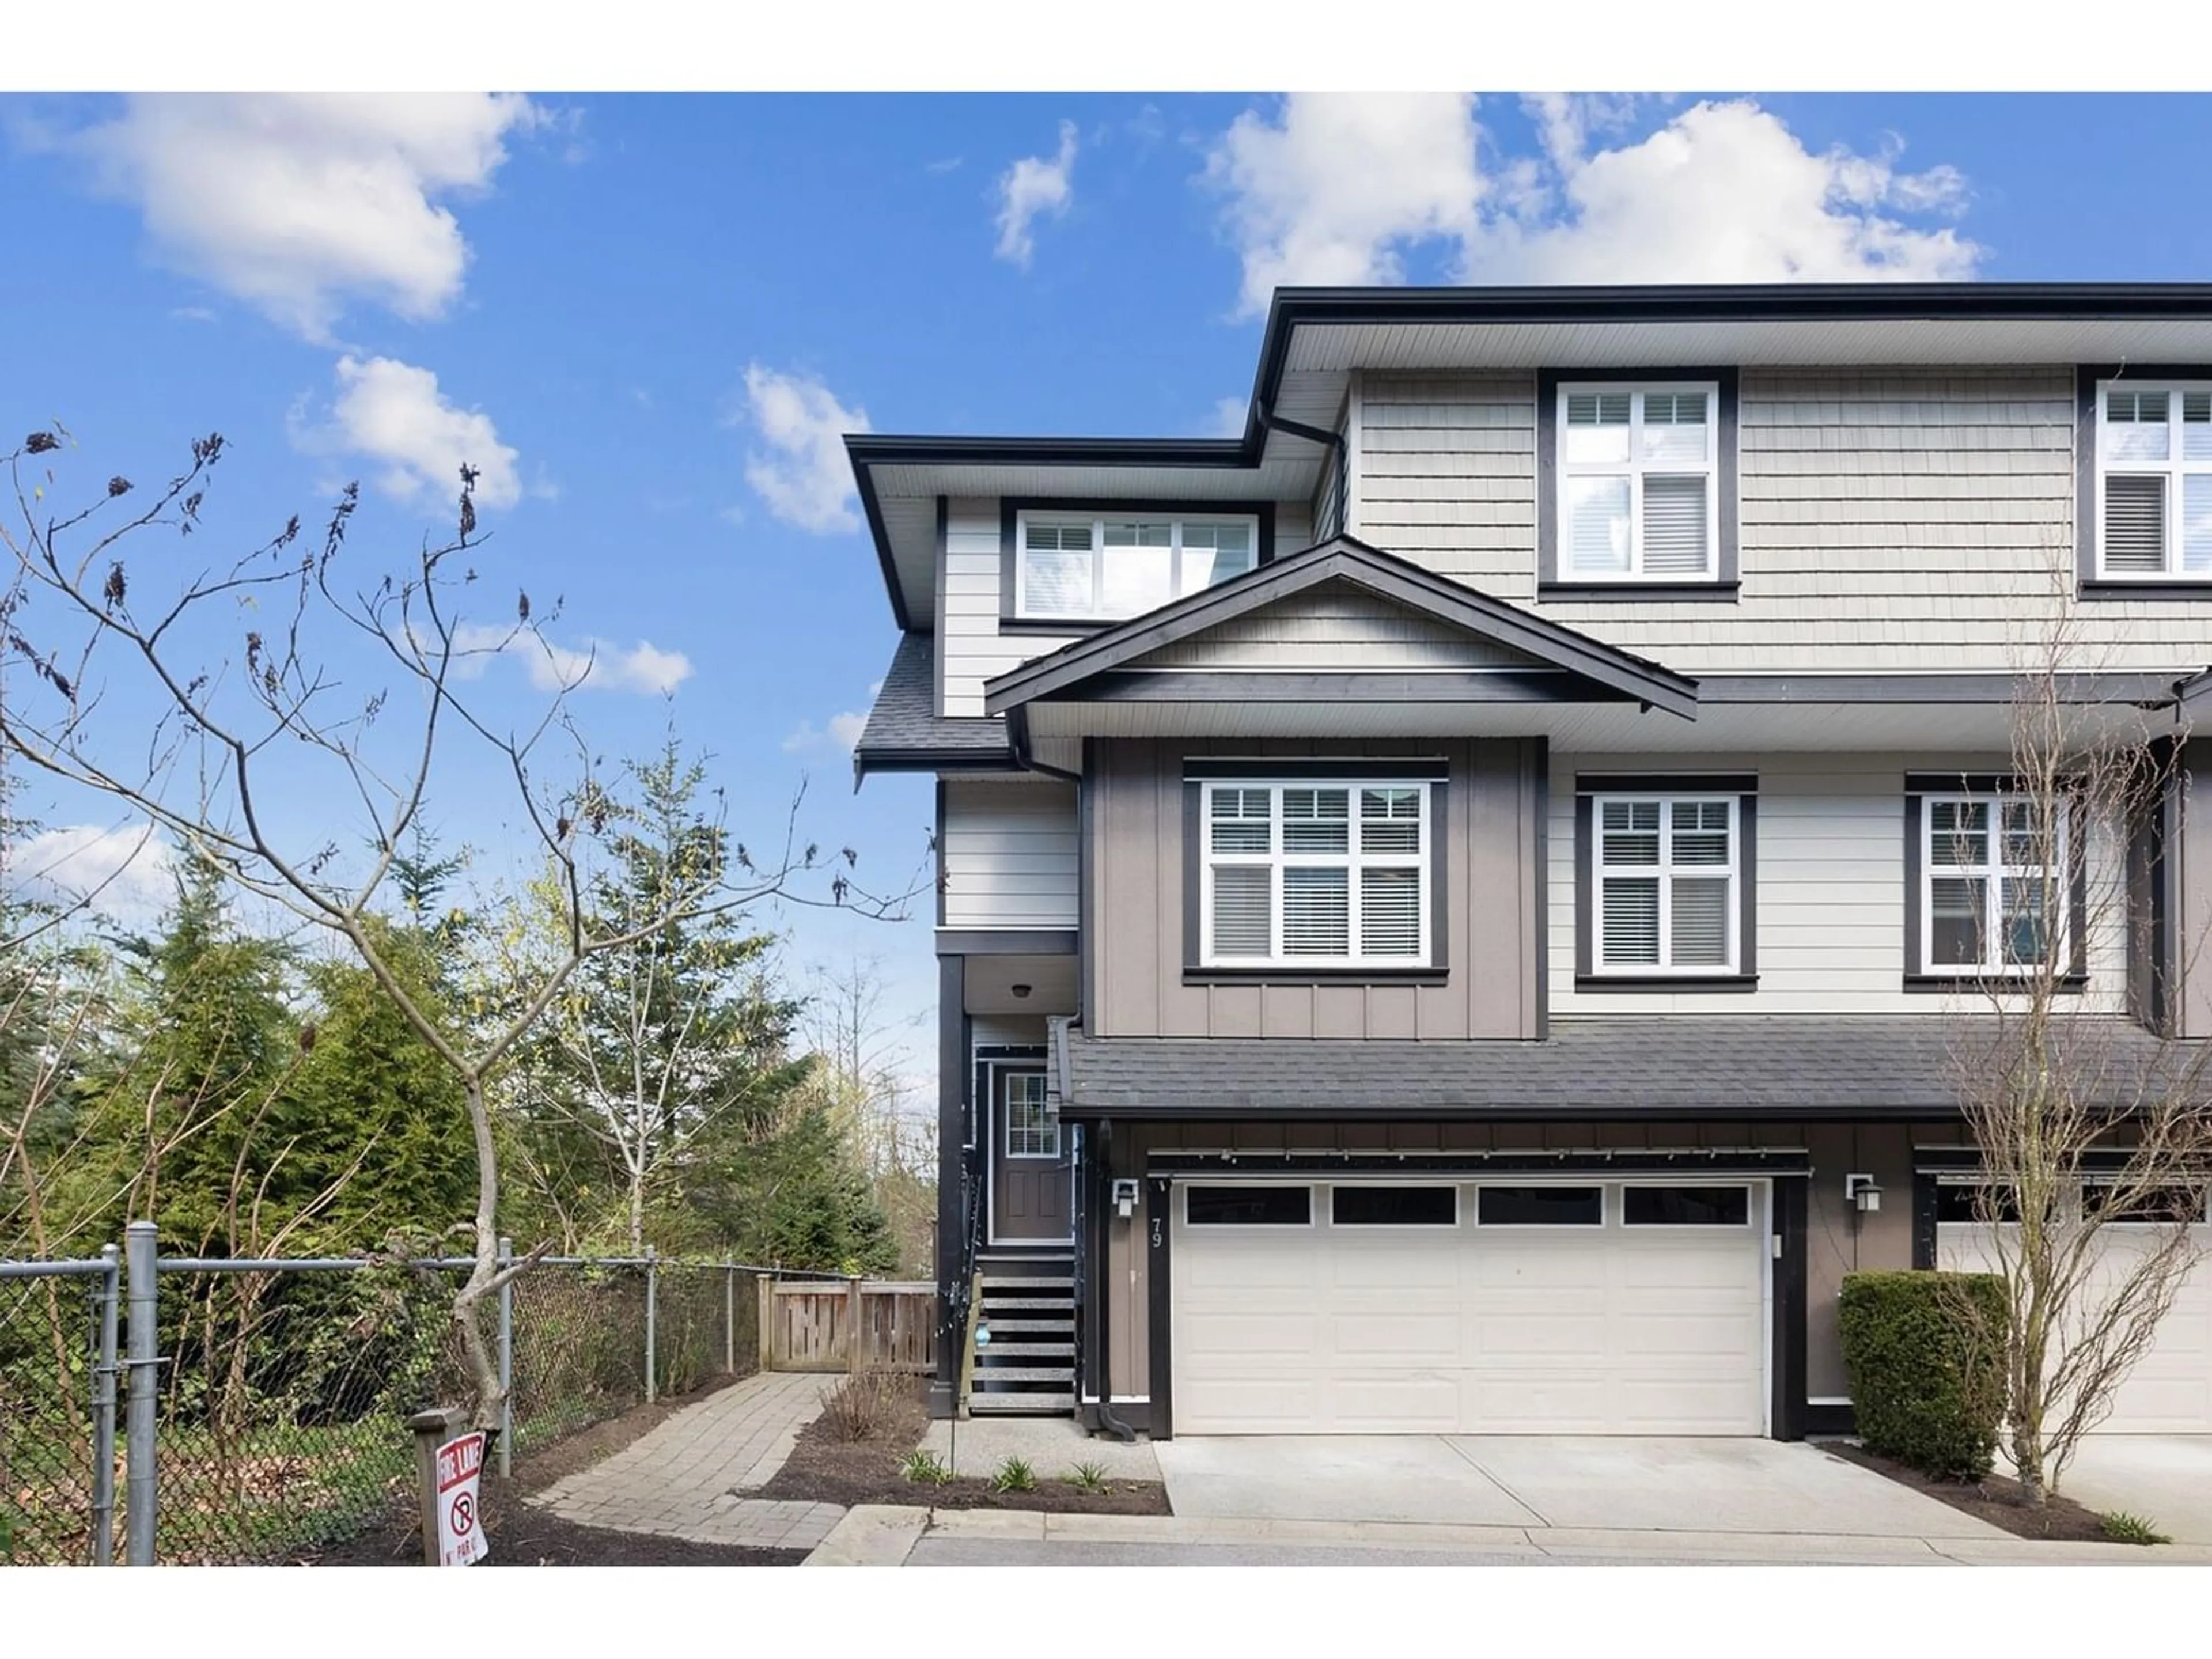 A pic from exterior of the house or condo for 79 6350 142 STREET, Surrey British Columbia V3X1B8